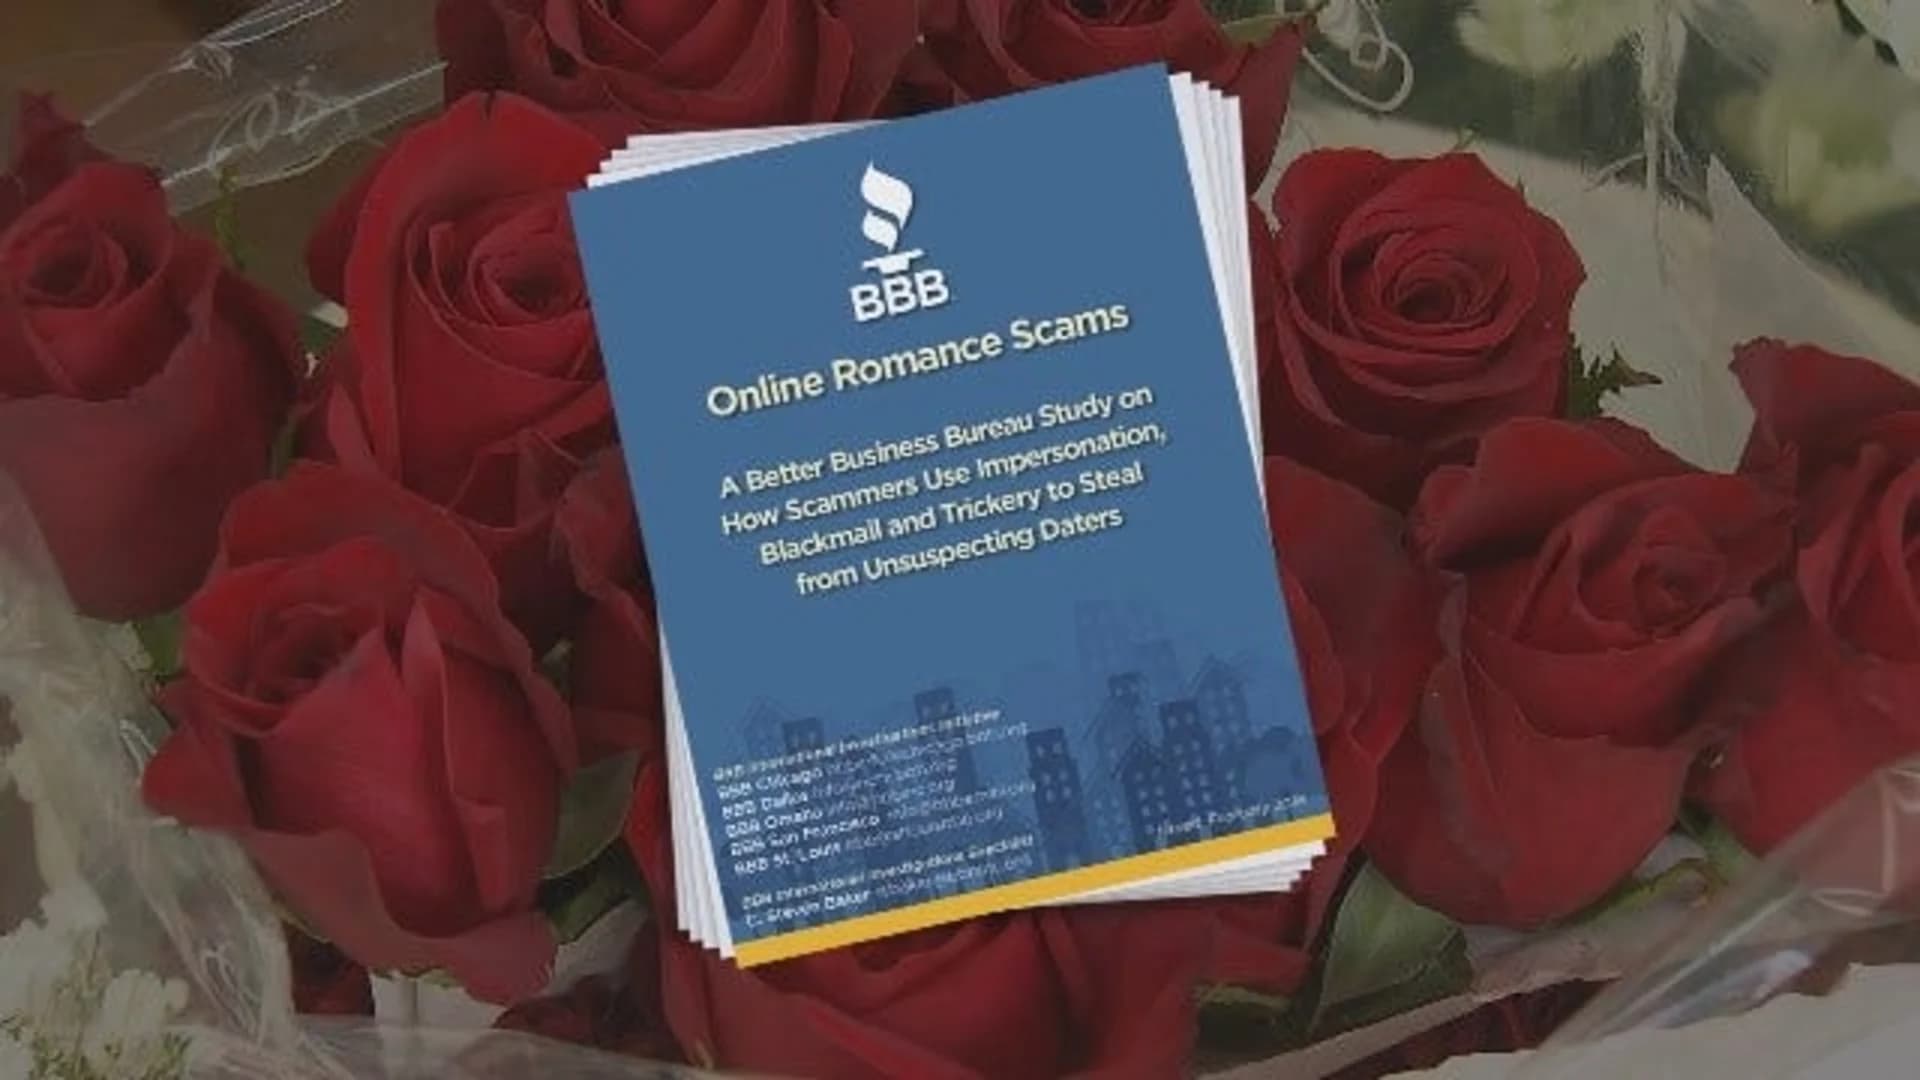 Consumer Alert: Sweetheart scams have cost US victims billions